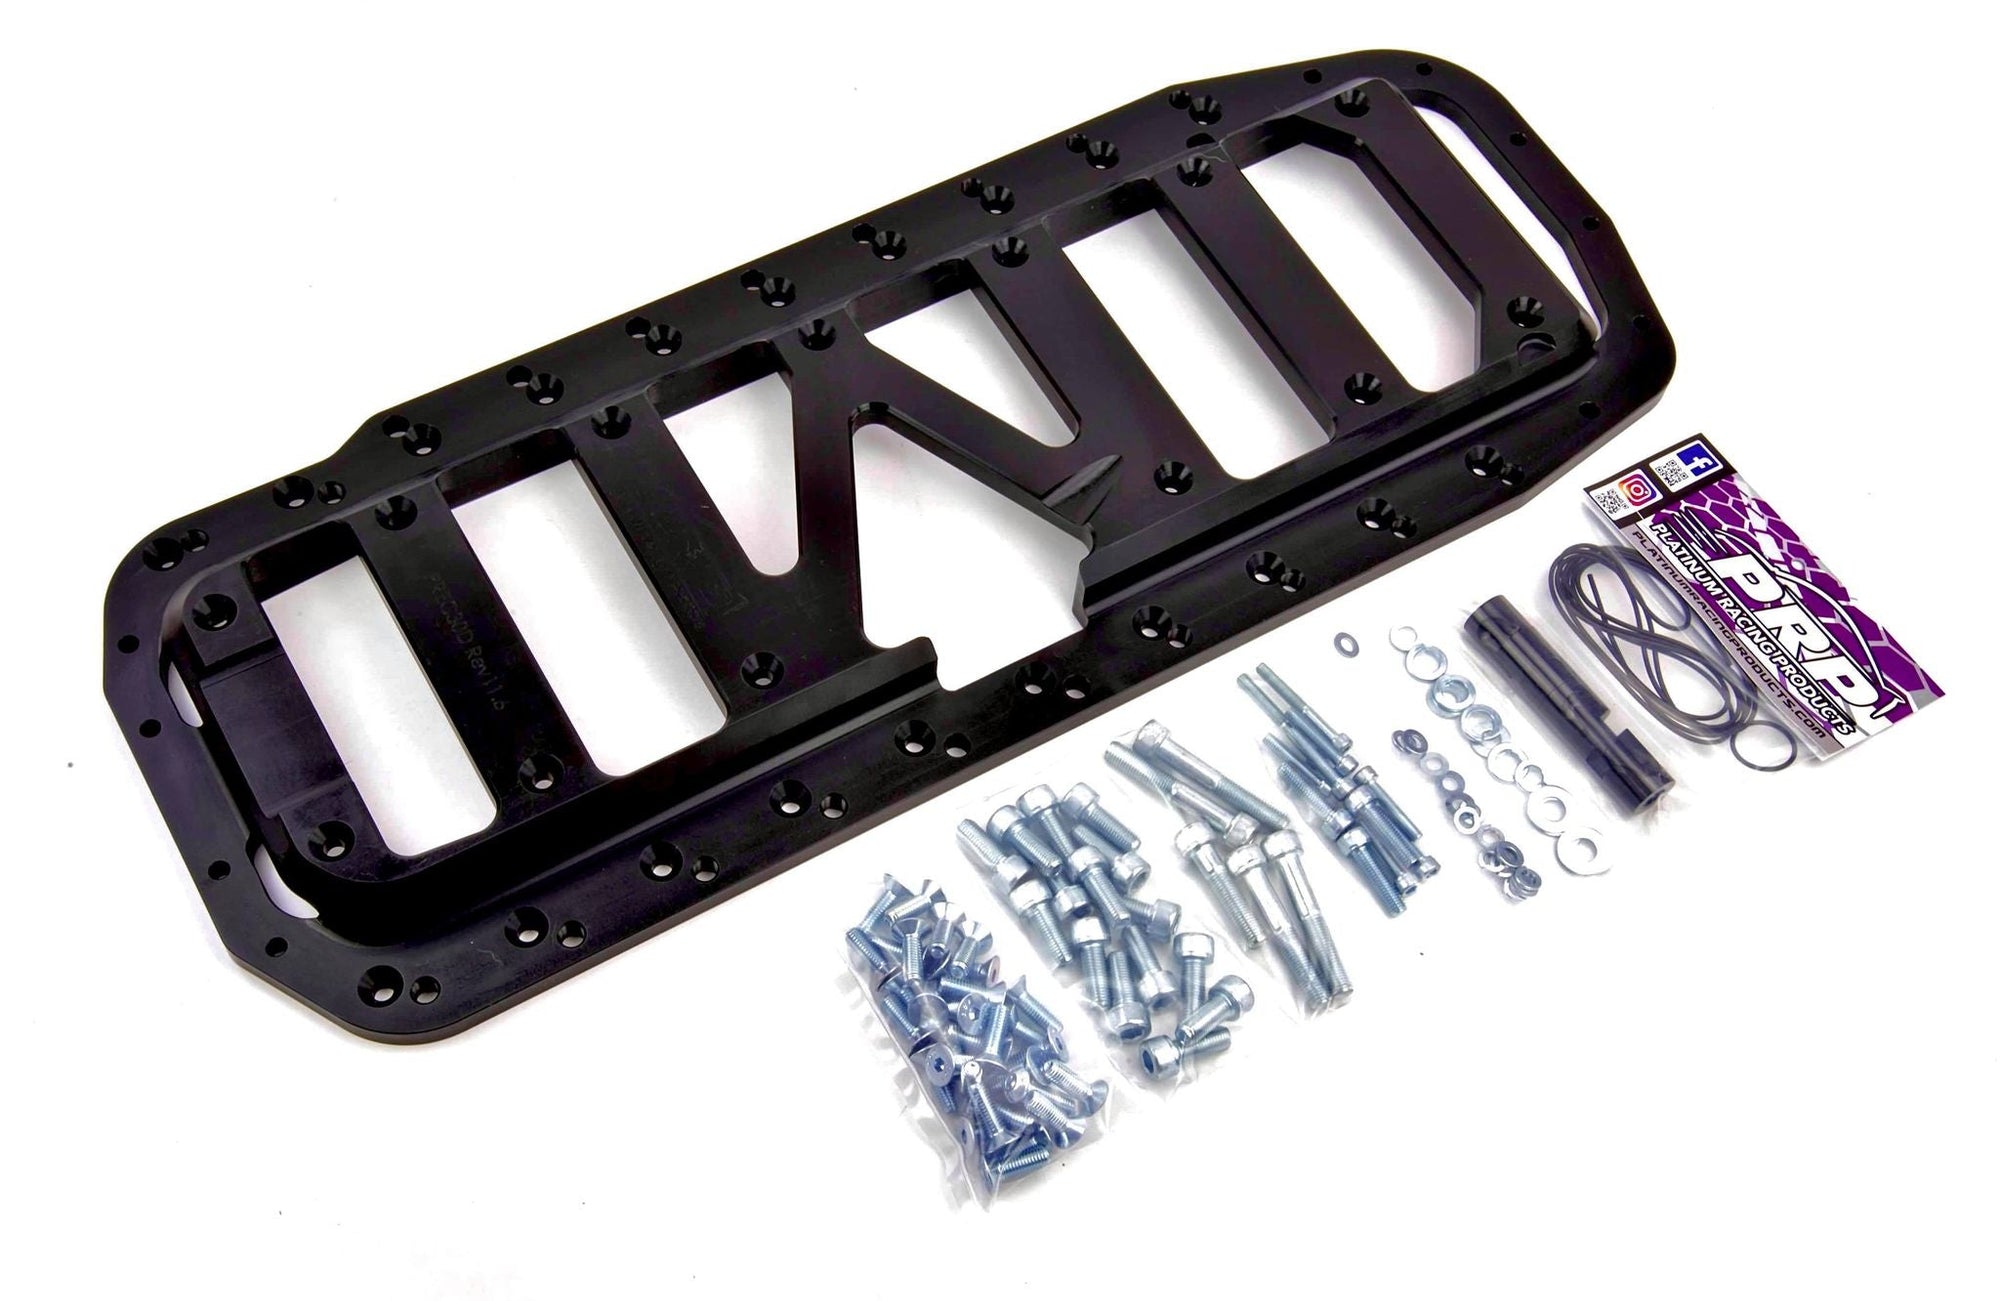 Platinum Racing Products - RD28, RB25 & RB30 Dry Sump Block Brace